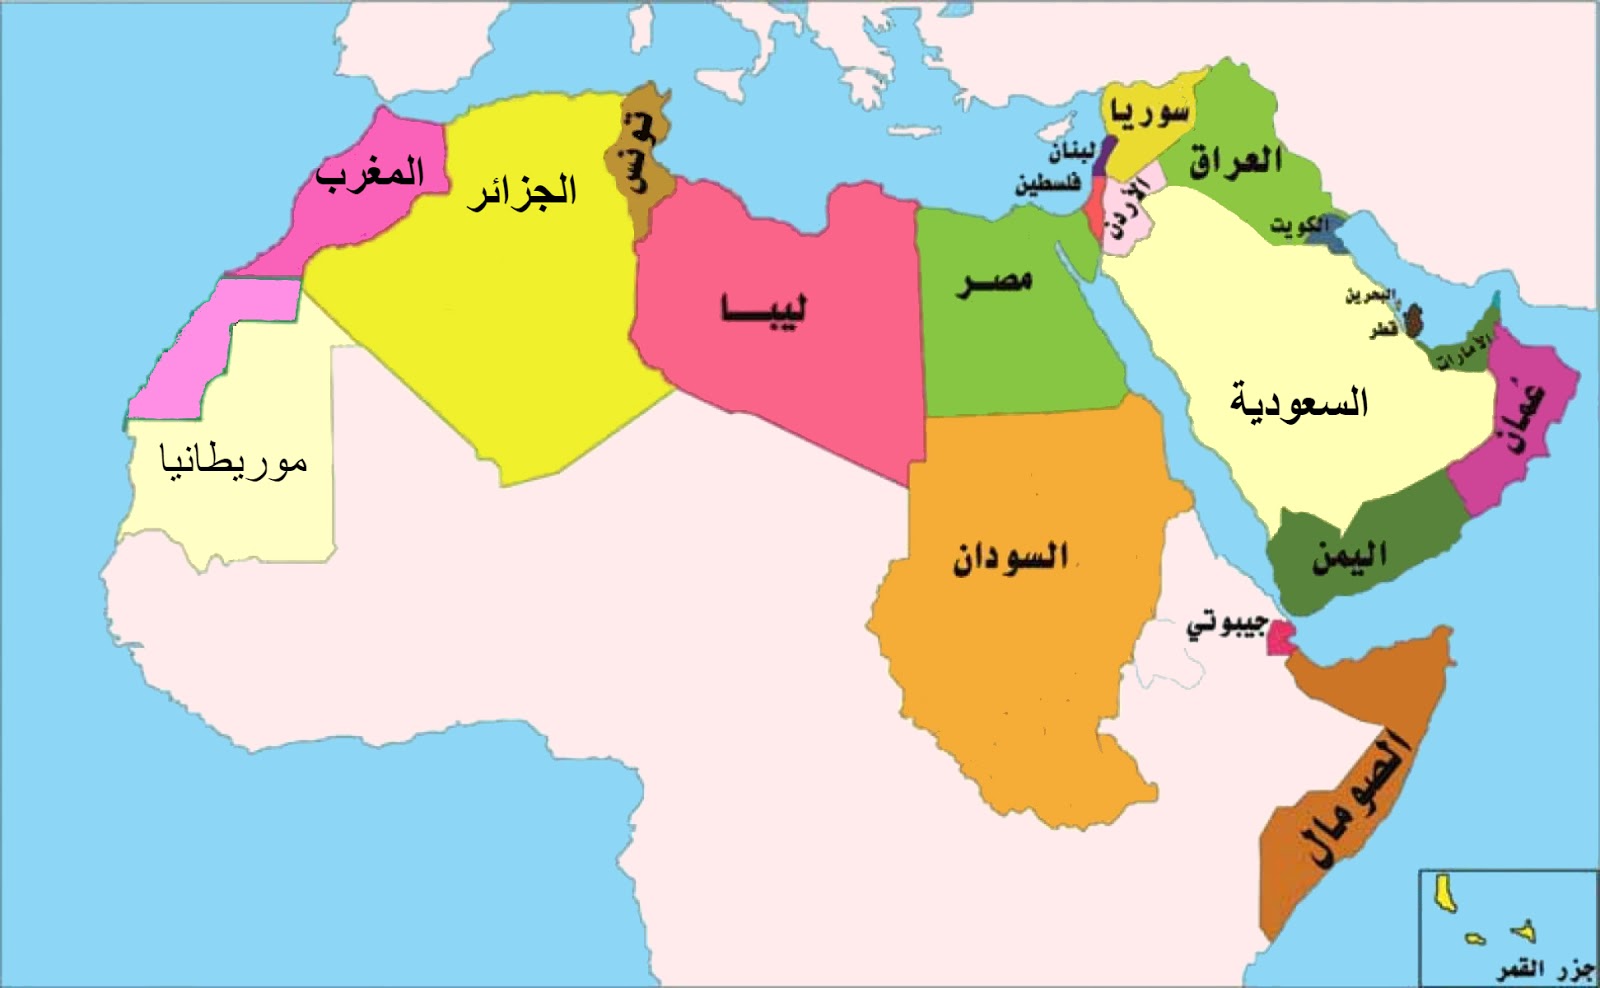 Map of the Arab world in pictures